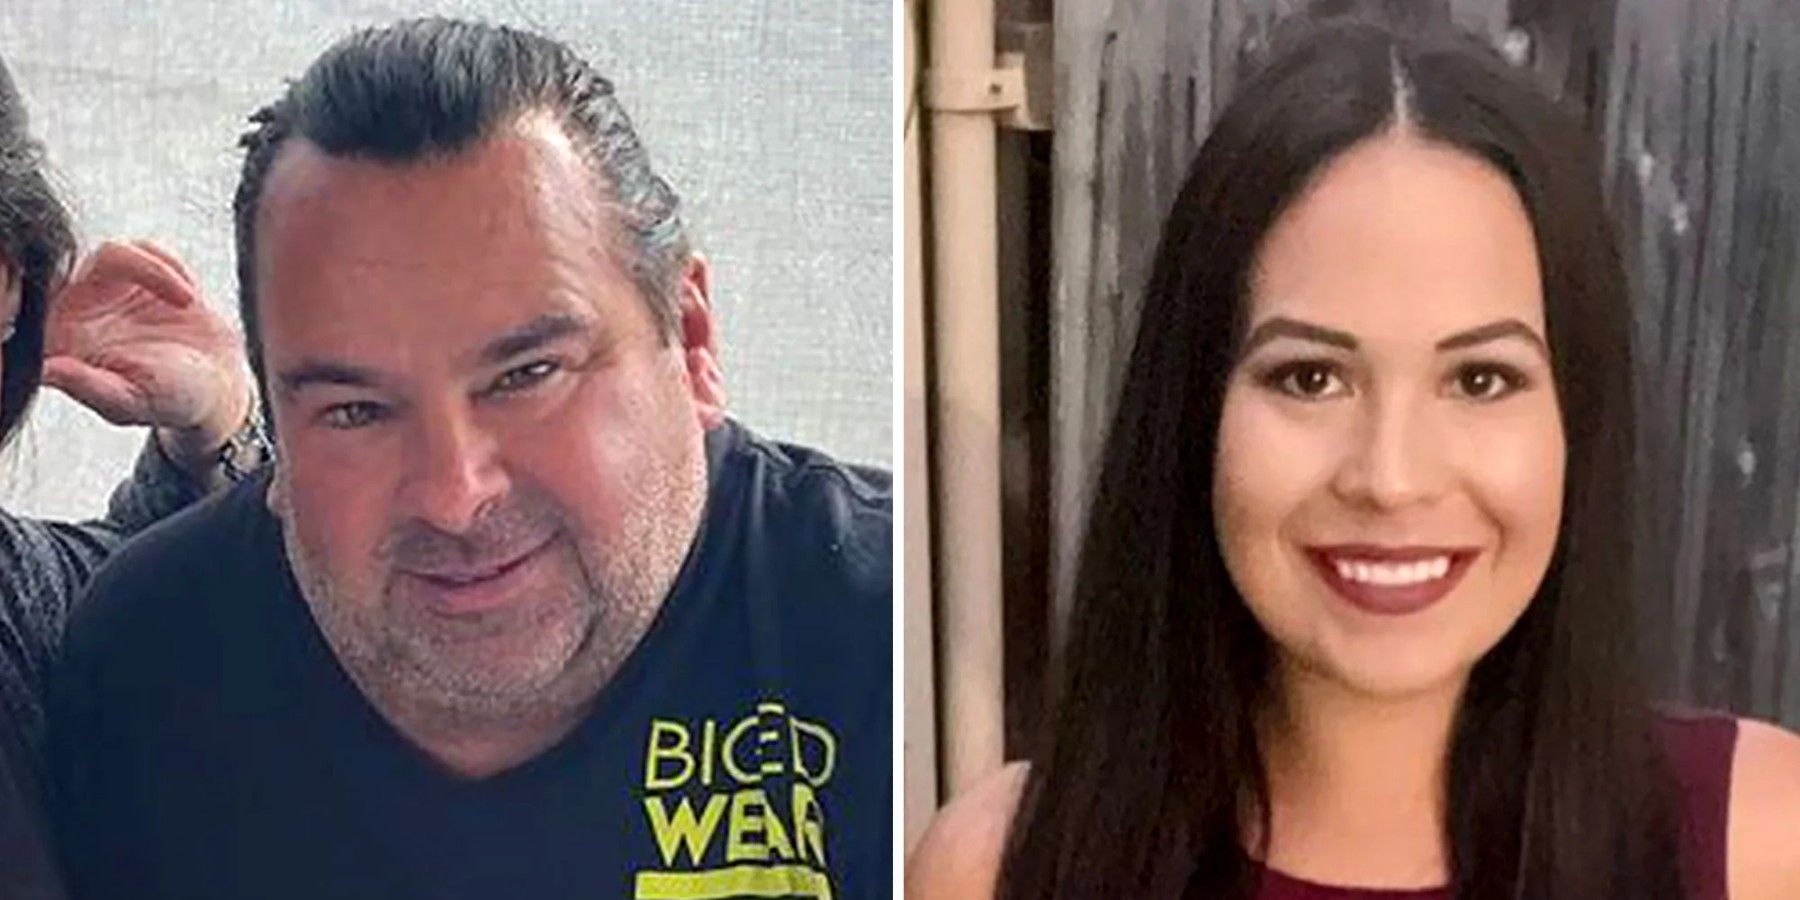 90 Day Fiancé: The Single Life: Liz Woods and Big Ed Brown side by side image